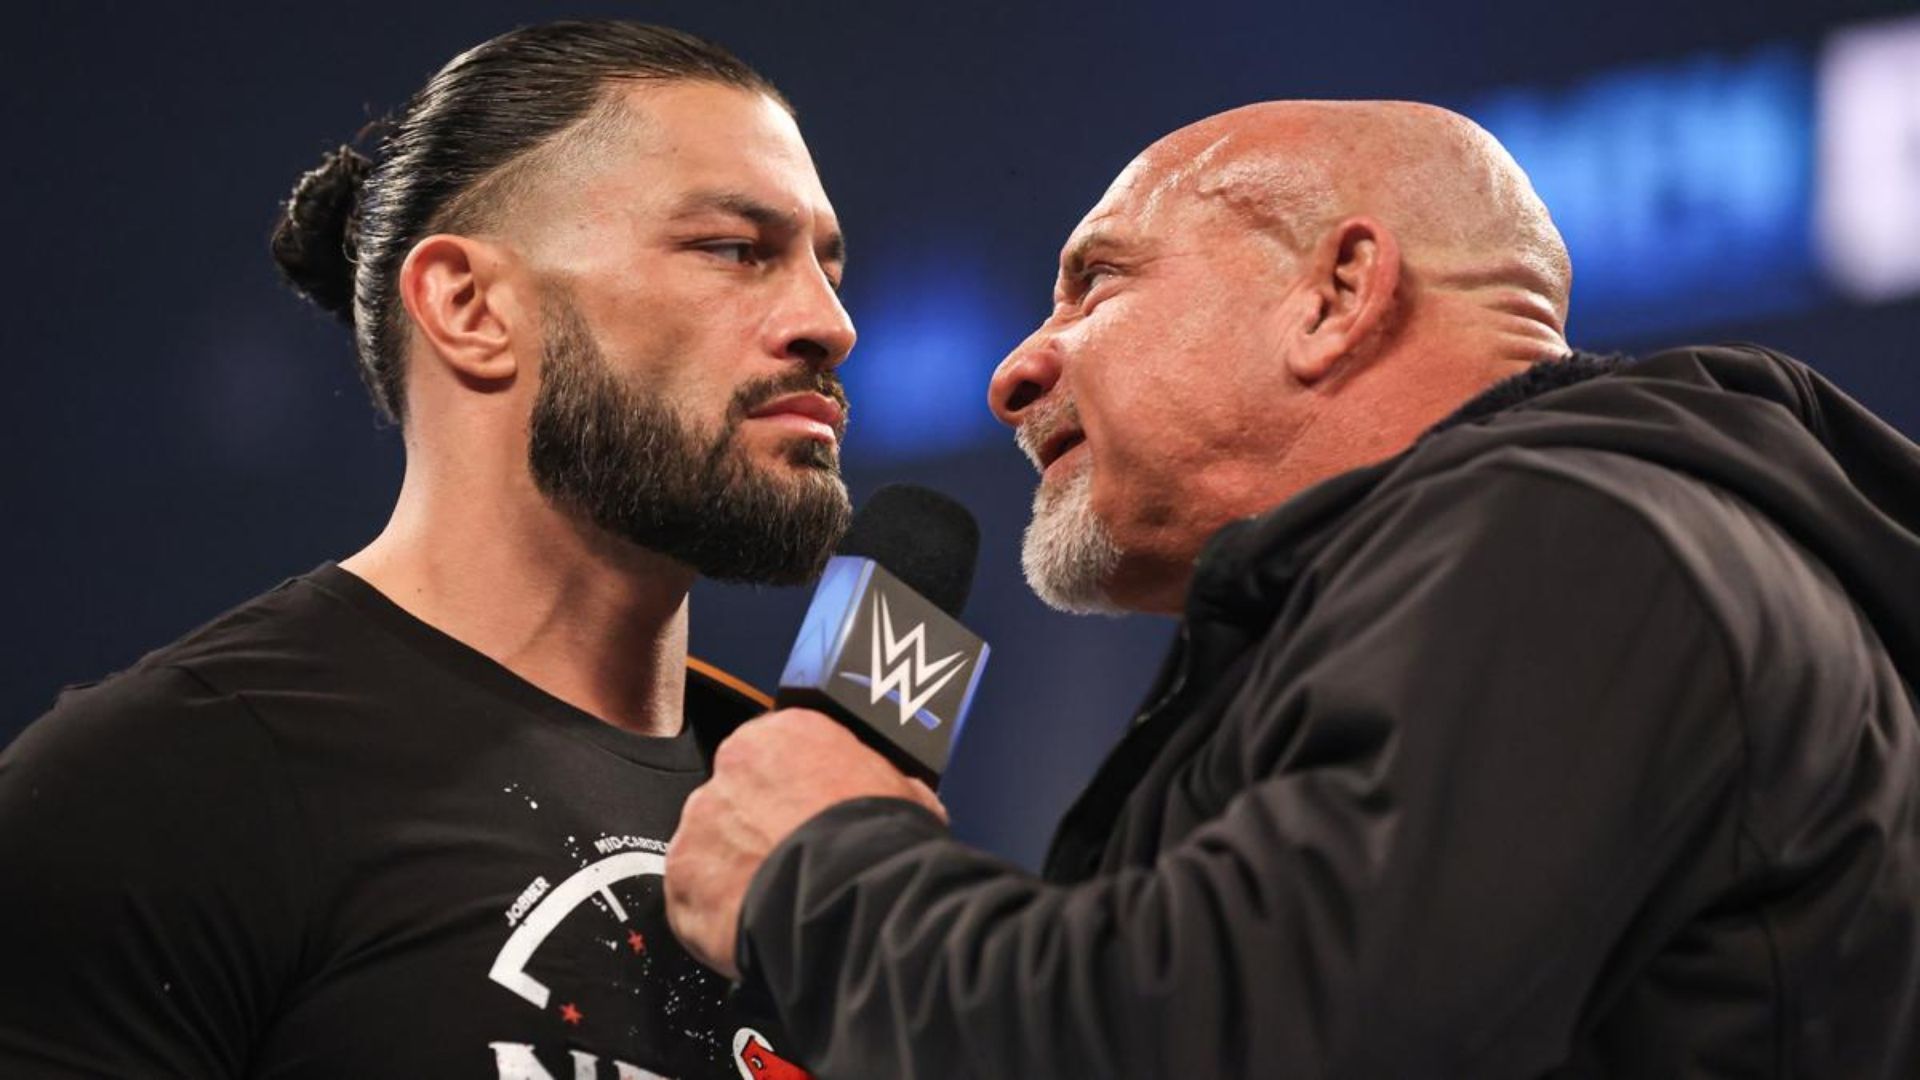 Roman Reigns and Goldberg will do battle at Elimination Chamber.